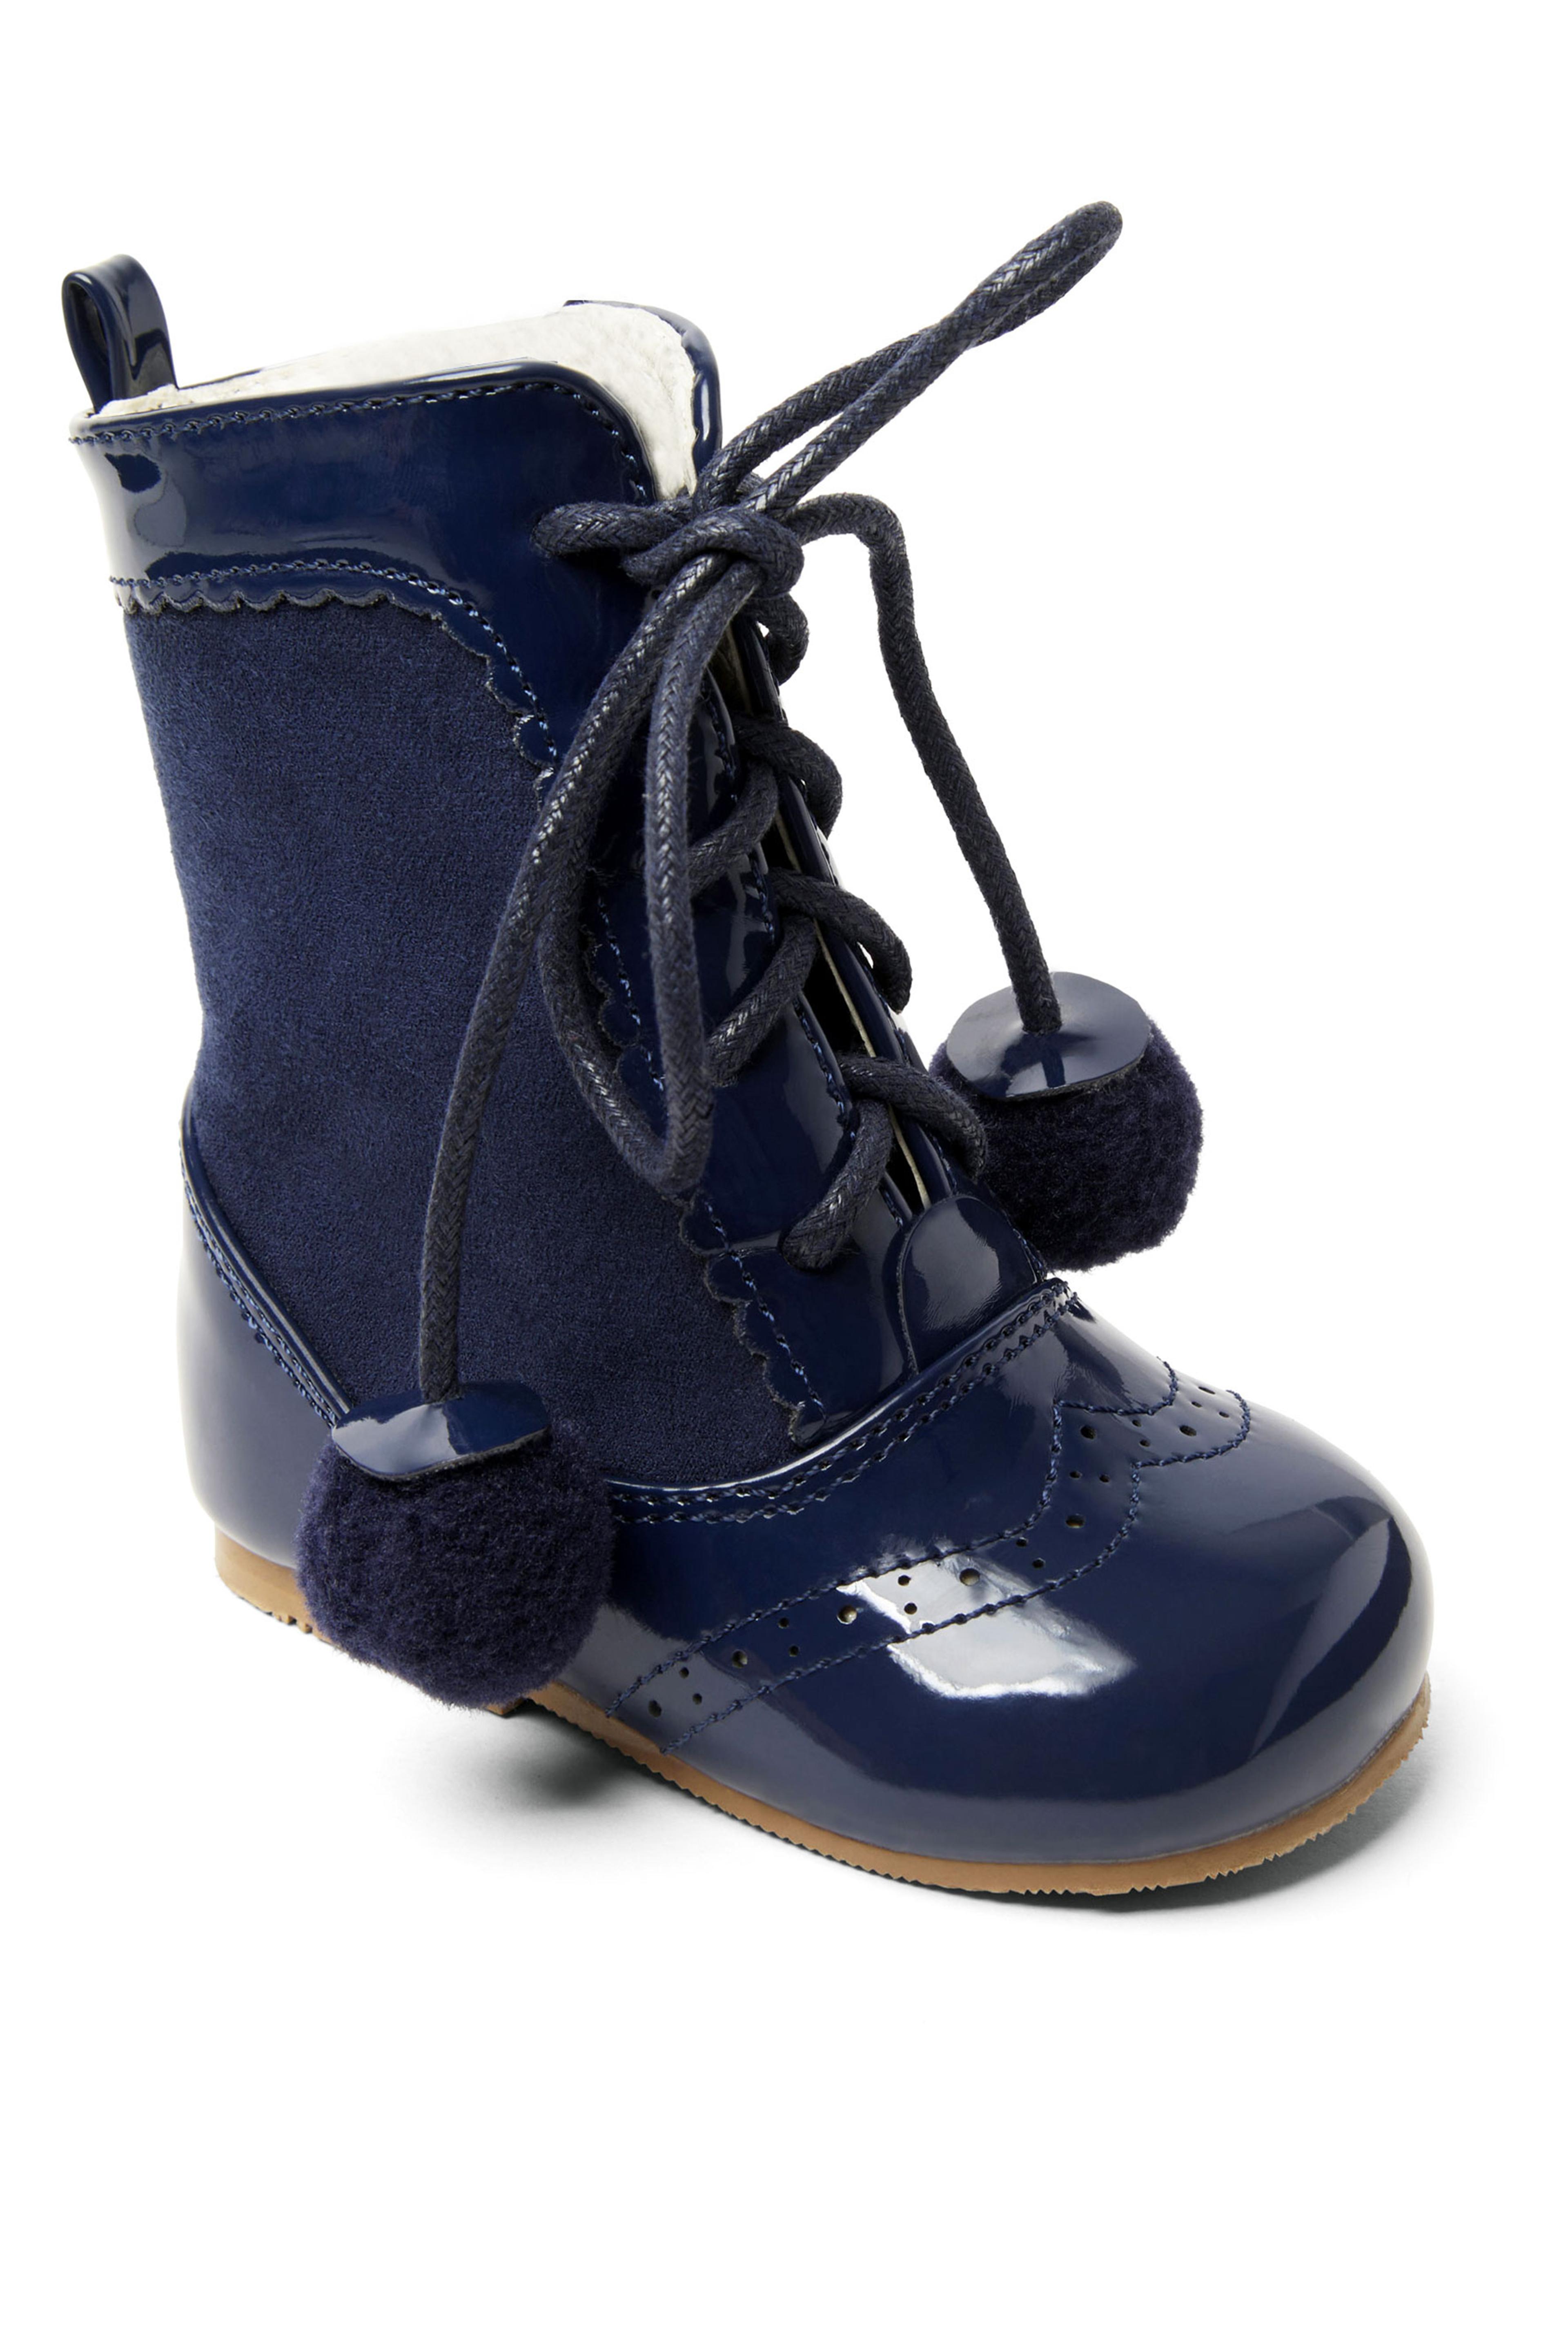 Kids Patent Leather Sienna Brogue Boots with Lace-Up and Pom-Pom Details, Unisex Classic Footwear - Navy Blue